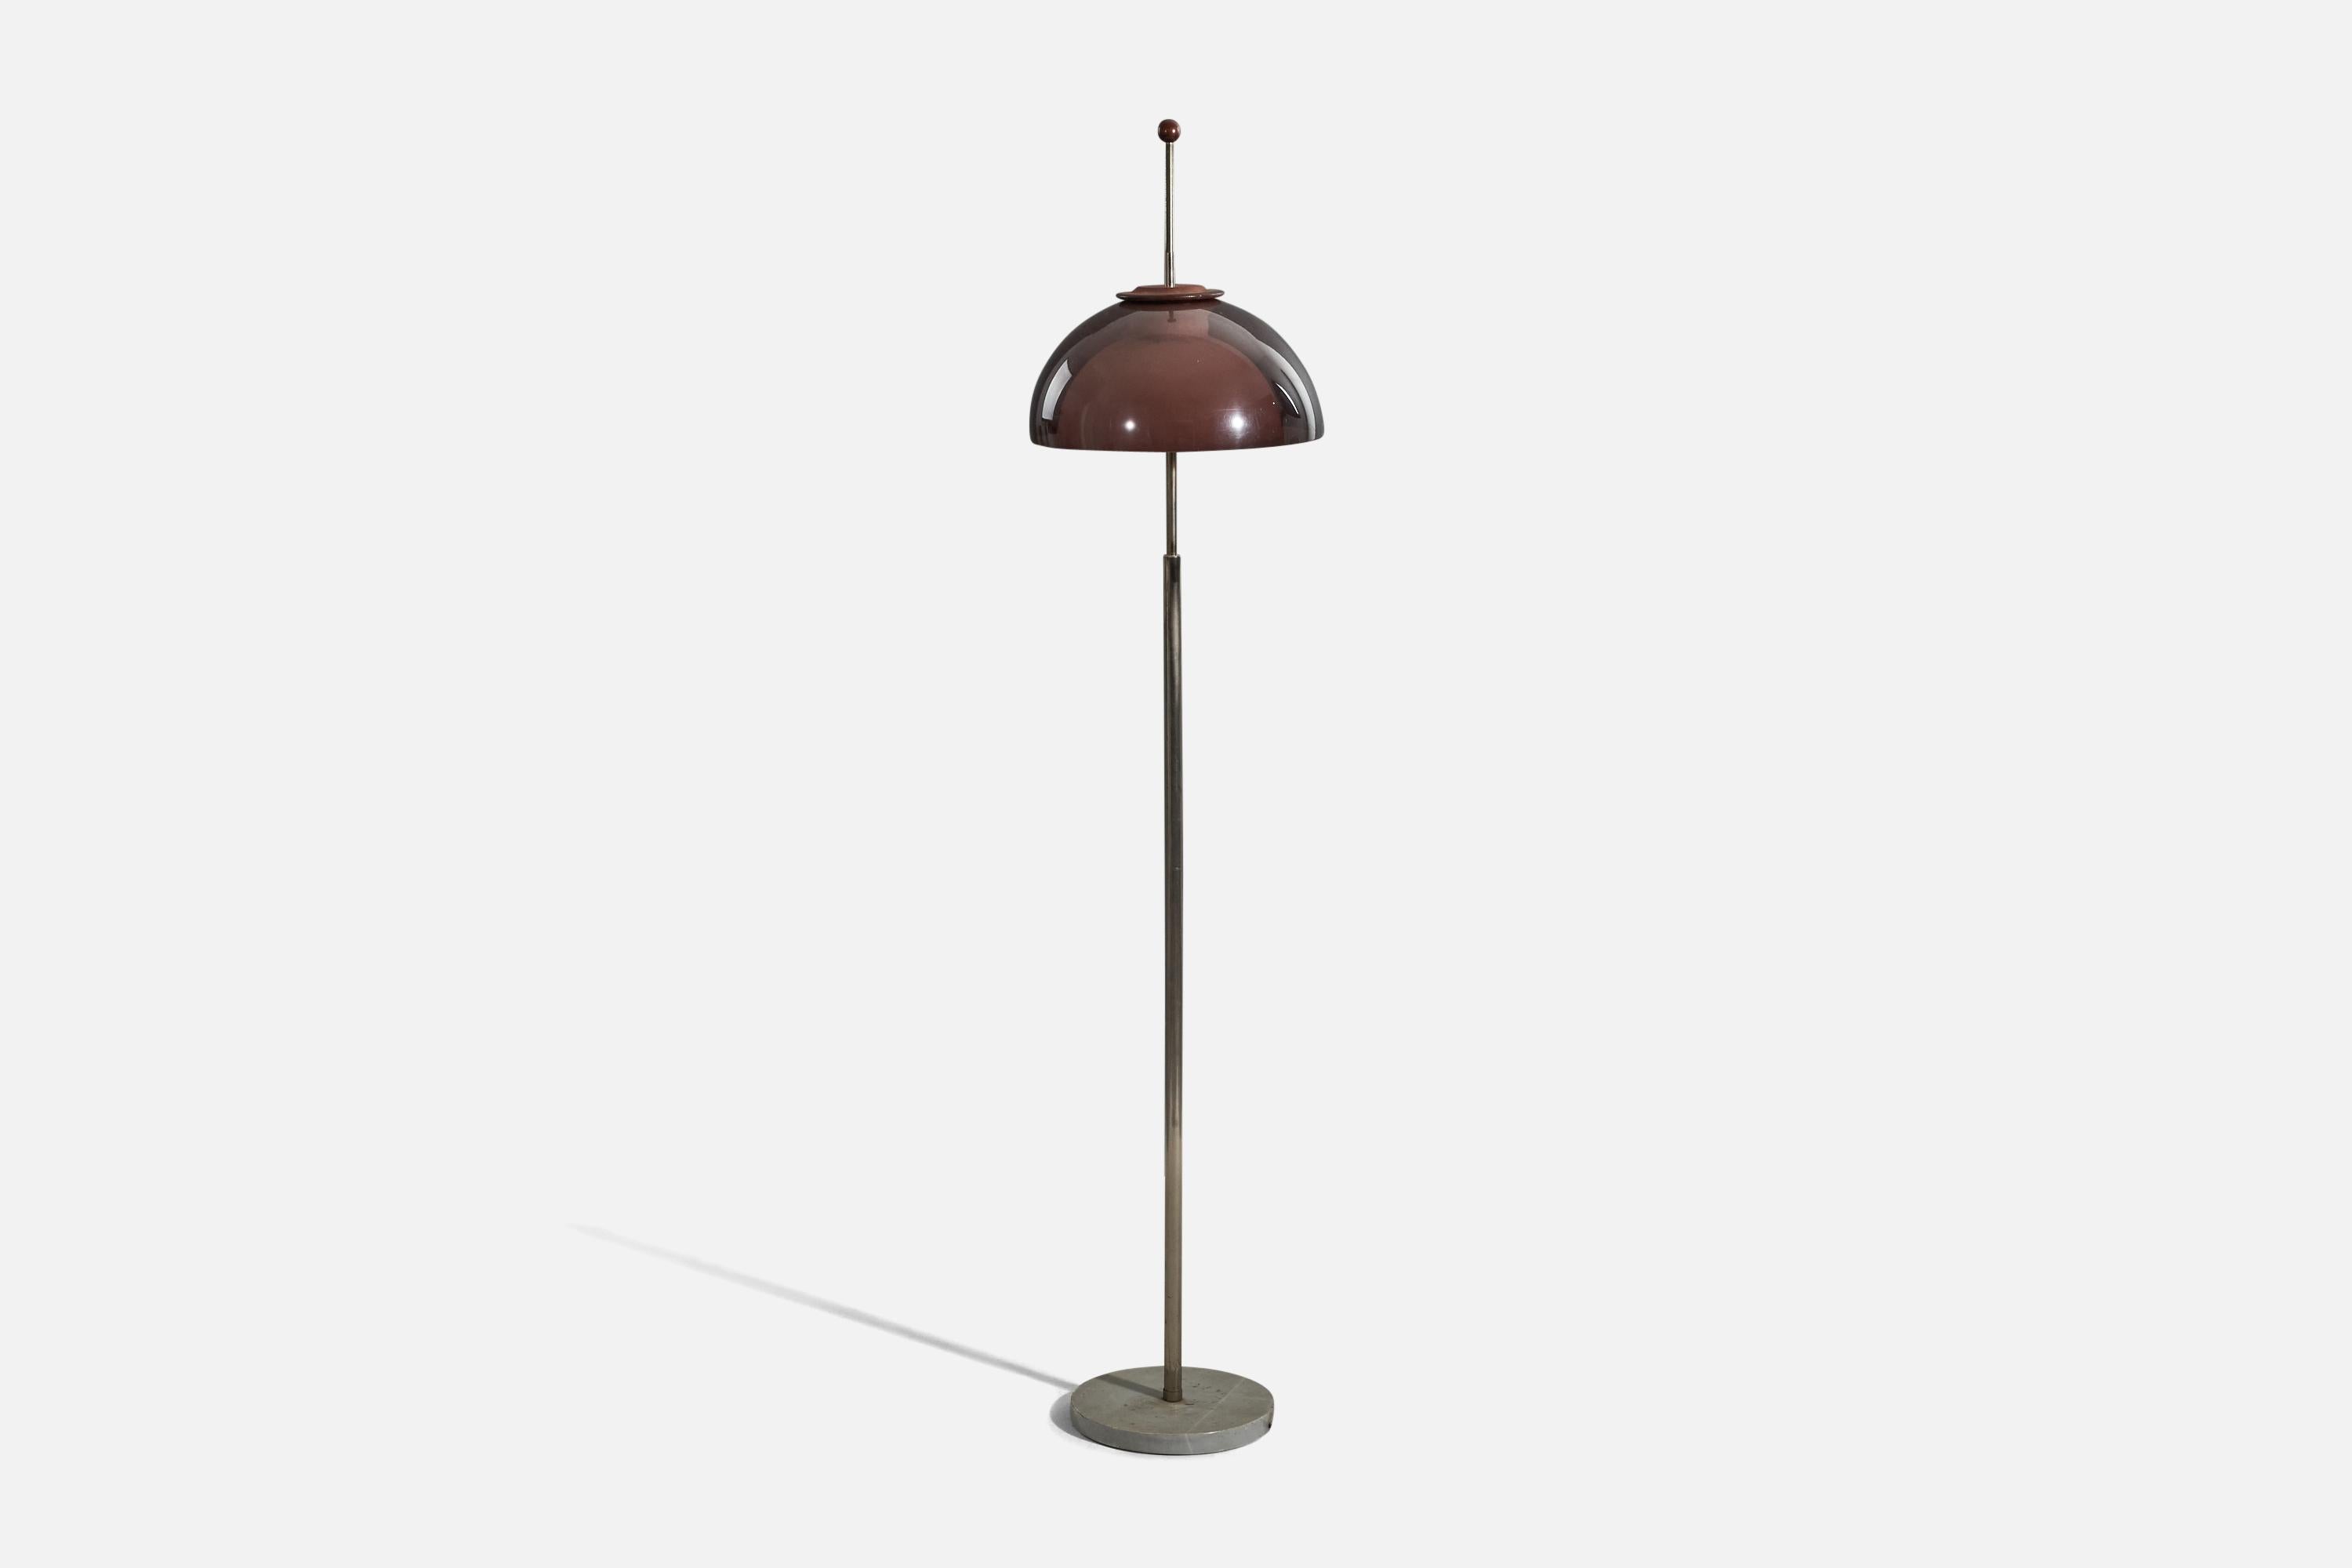 A brass, marble, teak and acrylic floor lamp designed and produced in Italy, c. 1950s.

Sold with Lampshade. 
Stated dimensions refer to the Floor Lamp with the Shade.